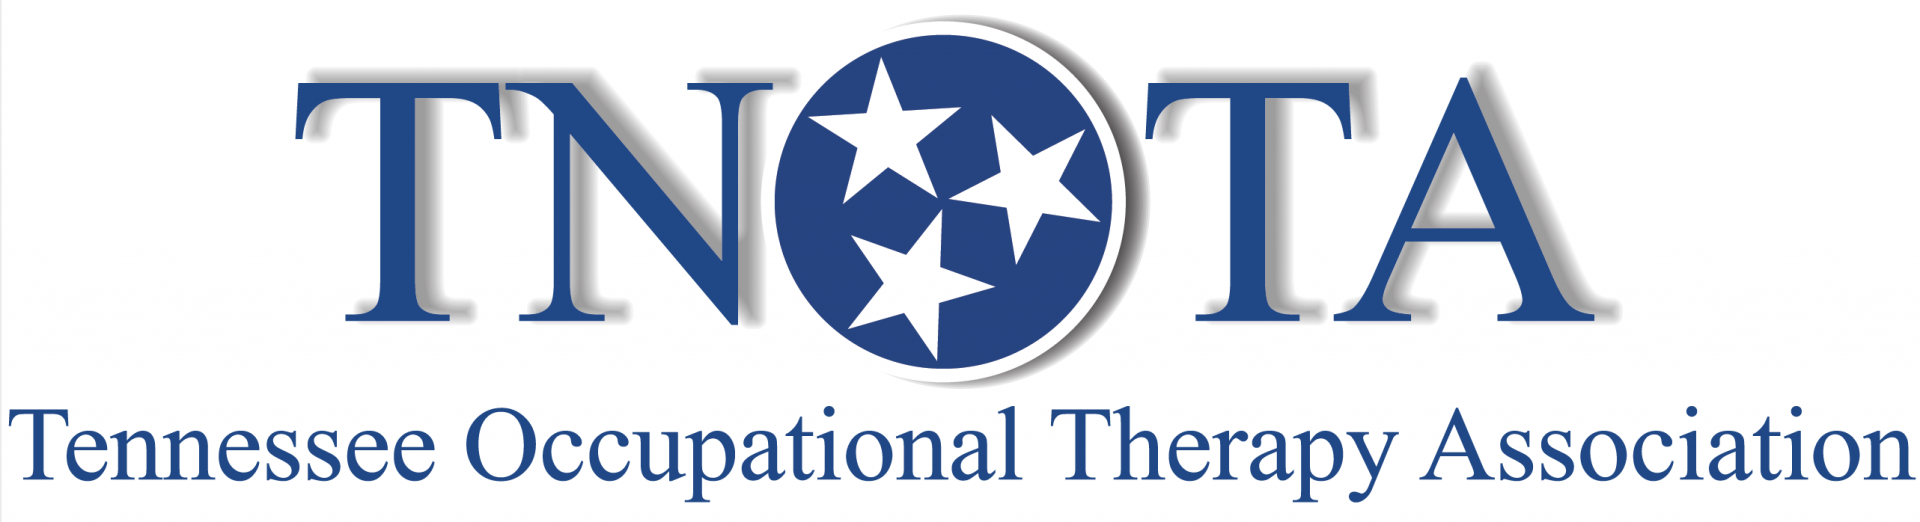 Logo for Tennessee Occupational Therapy Association with blue letters and graphic spell TNOTA 